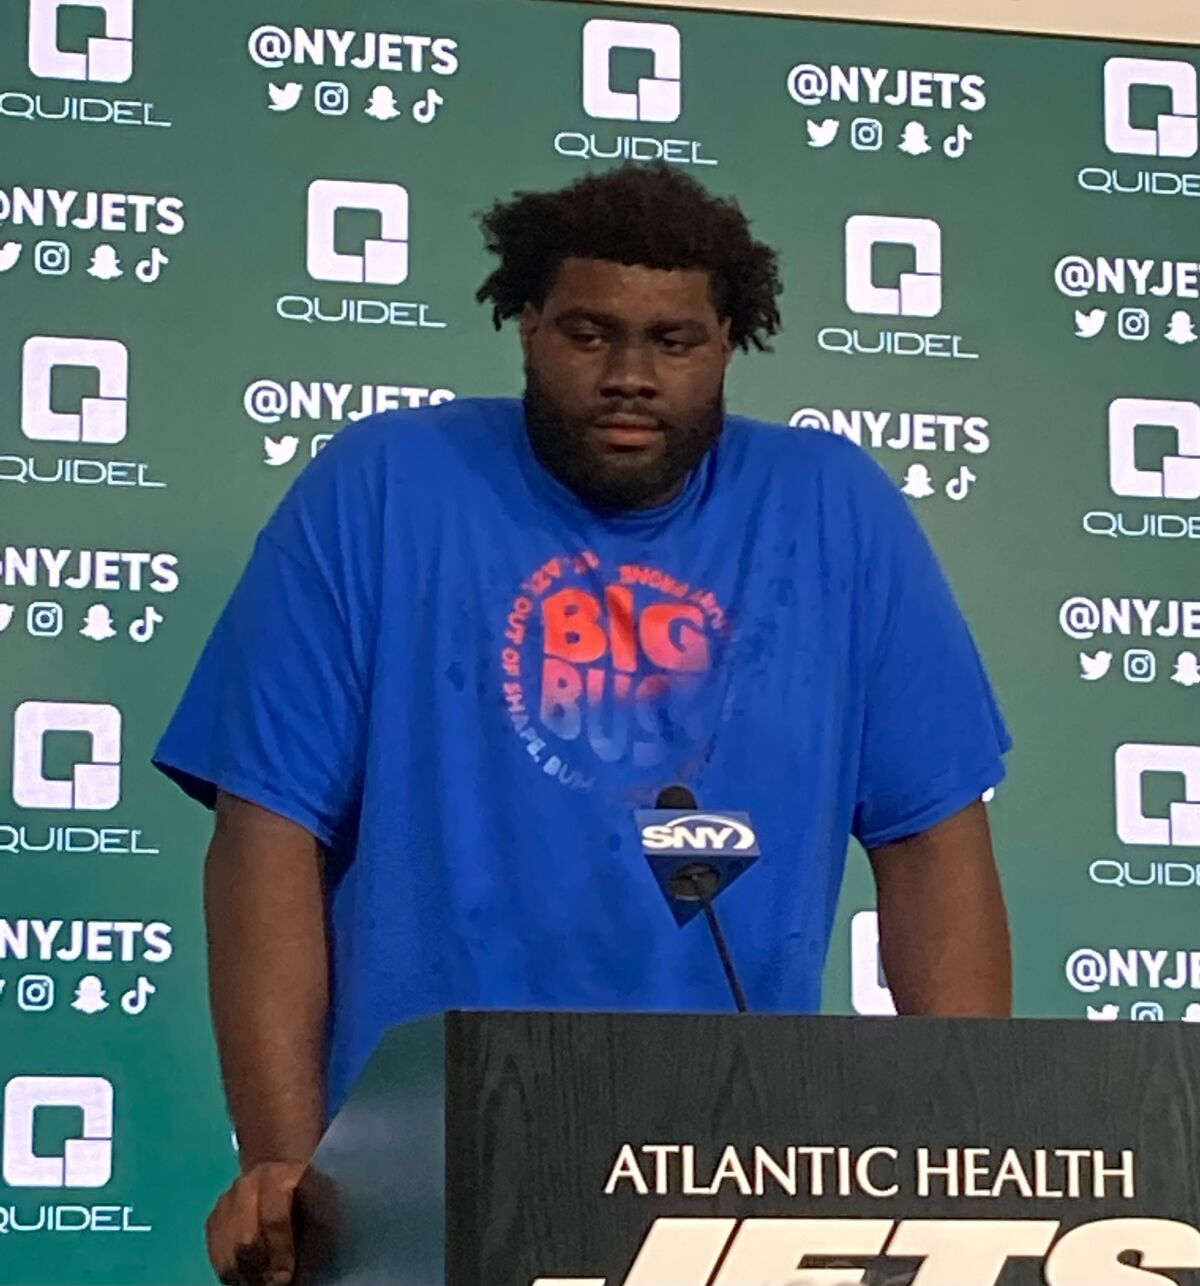 New York Jets offensive tackle Mekhi Becton speaks to reporters at the teams NFL football facility in Florham Park, N.J., Wednesday, June 15, 2022. The offensive tackle knows he is being written off by many, but insists he's going to make all of his critics "eat their words."(AP Photo/Dennis Waszak Jr.)